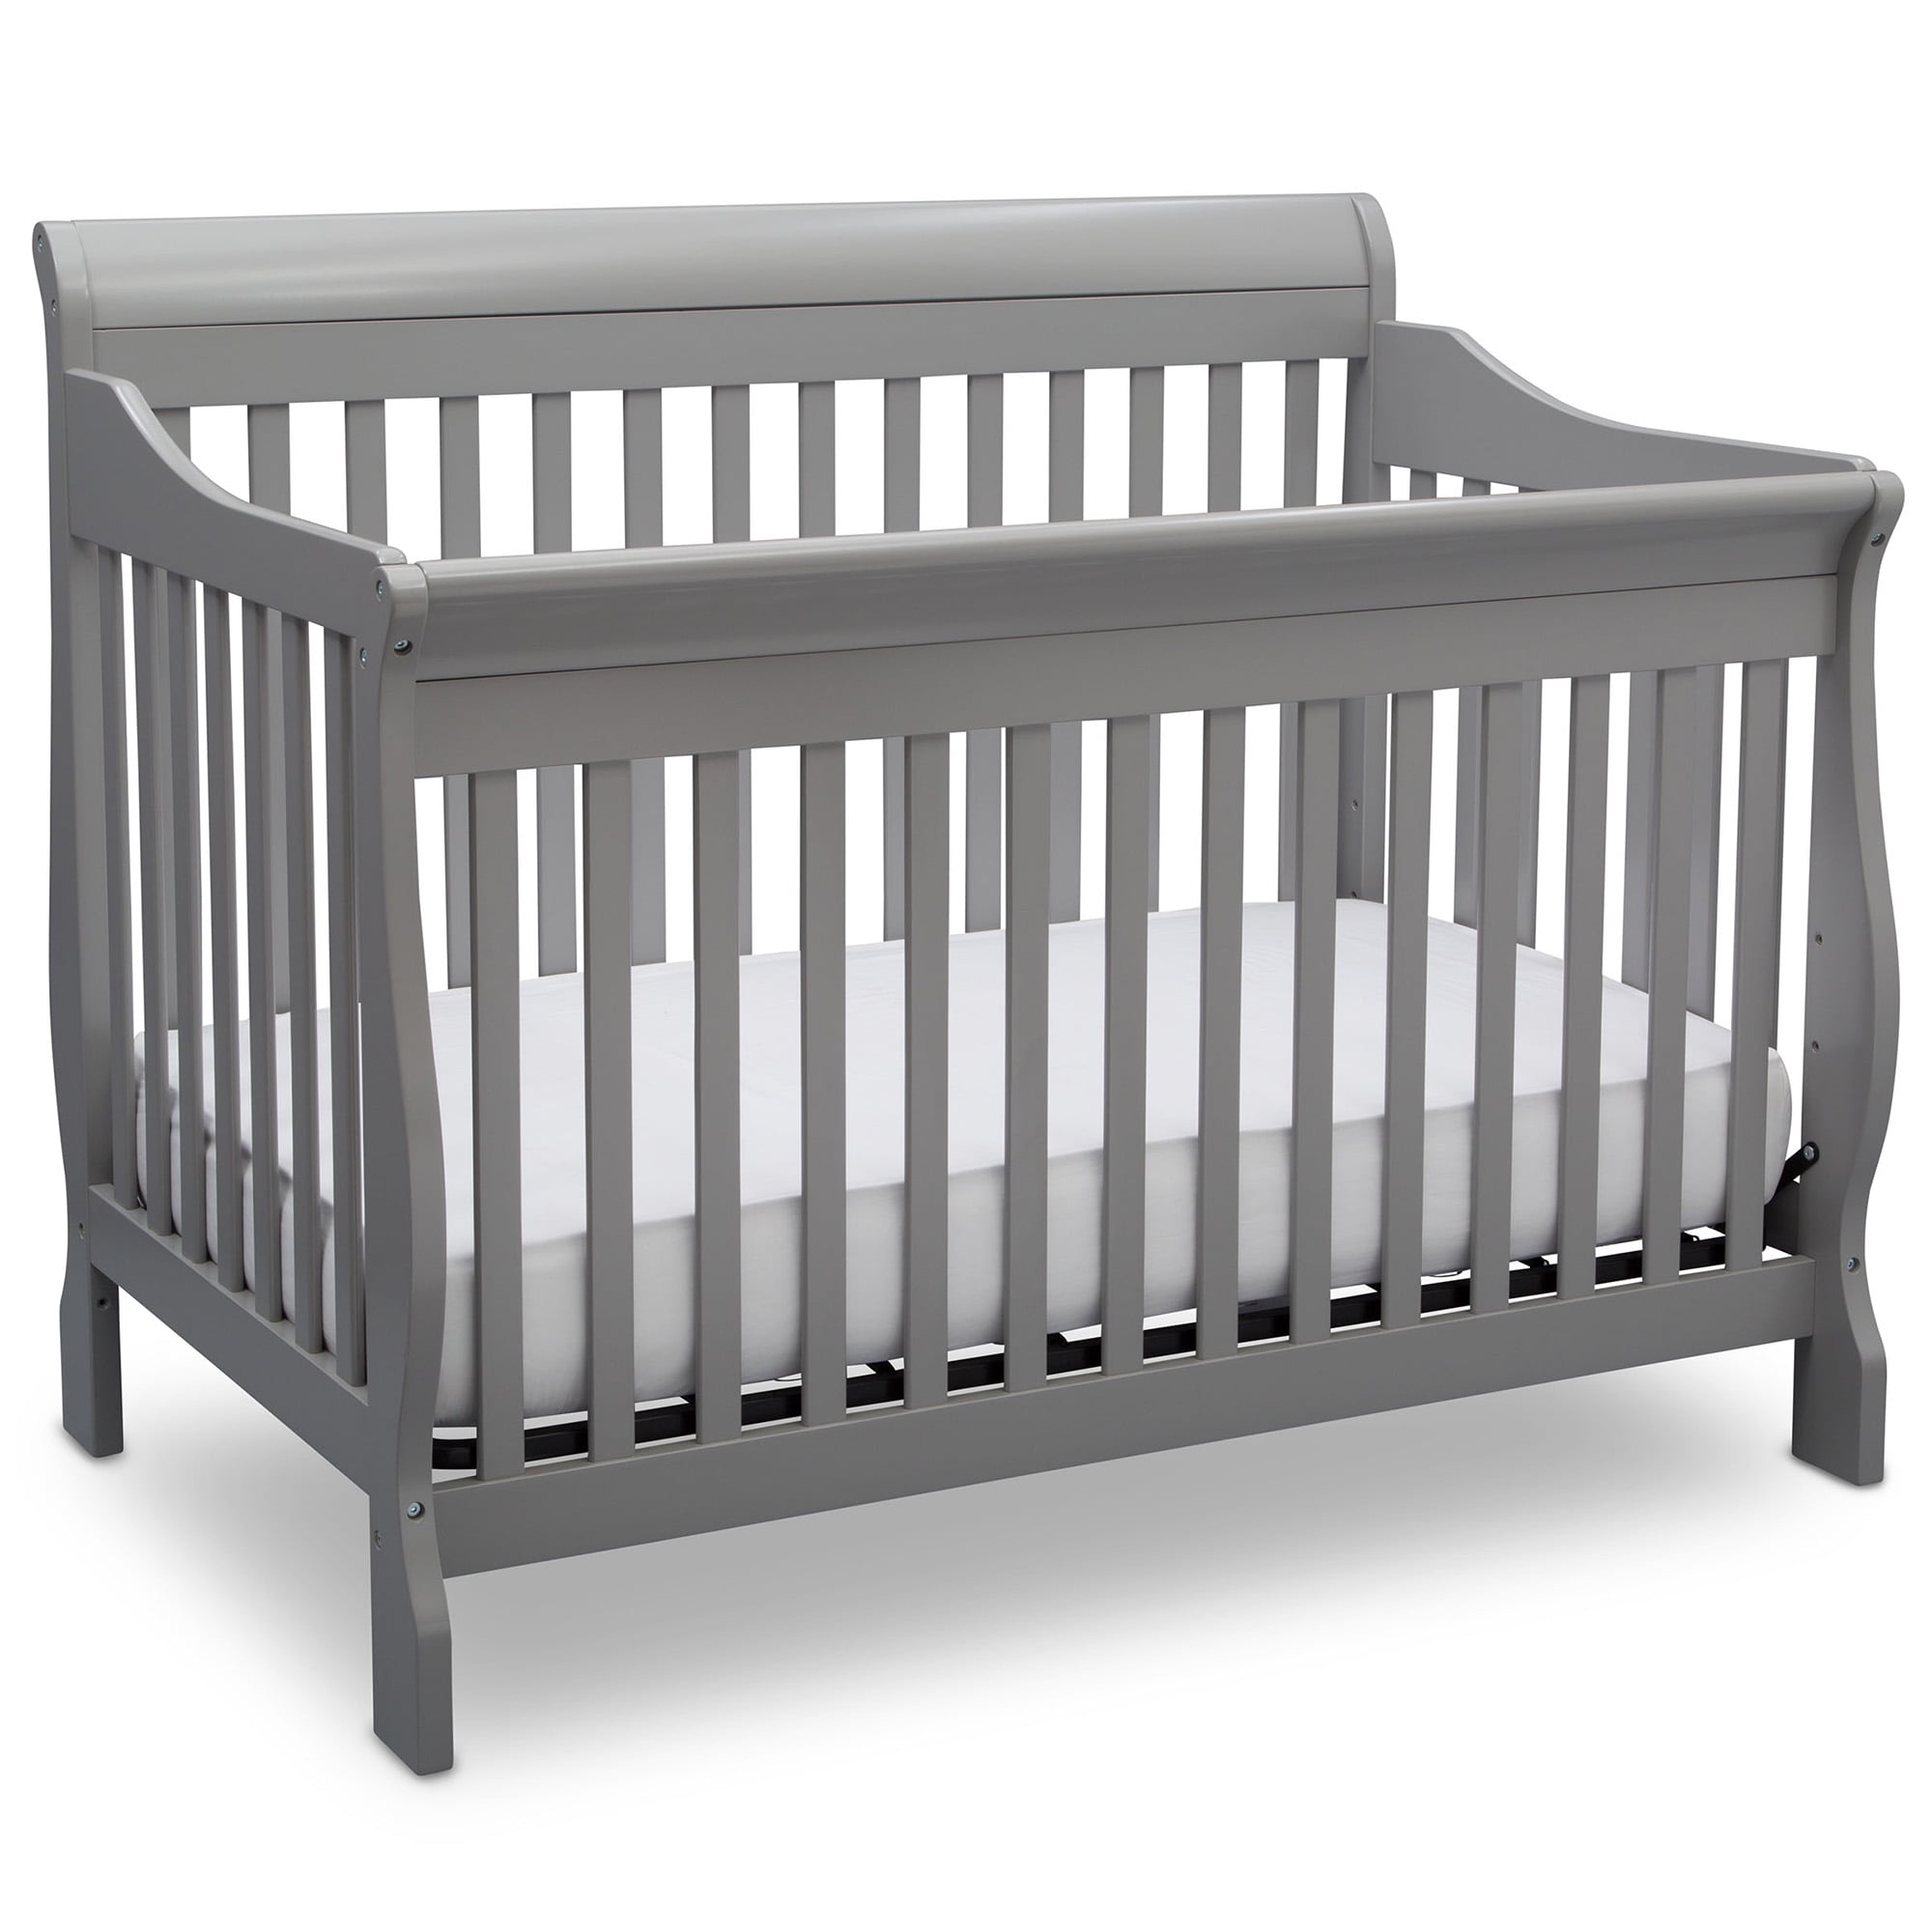 Photo 1 of (SCRATCHED)
Delta Children Canton 4-in-1 Convertible Crib Gray